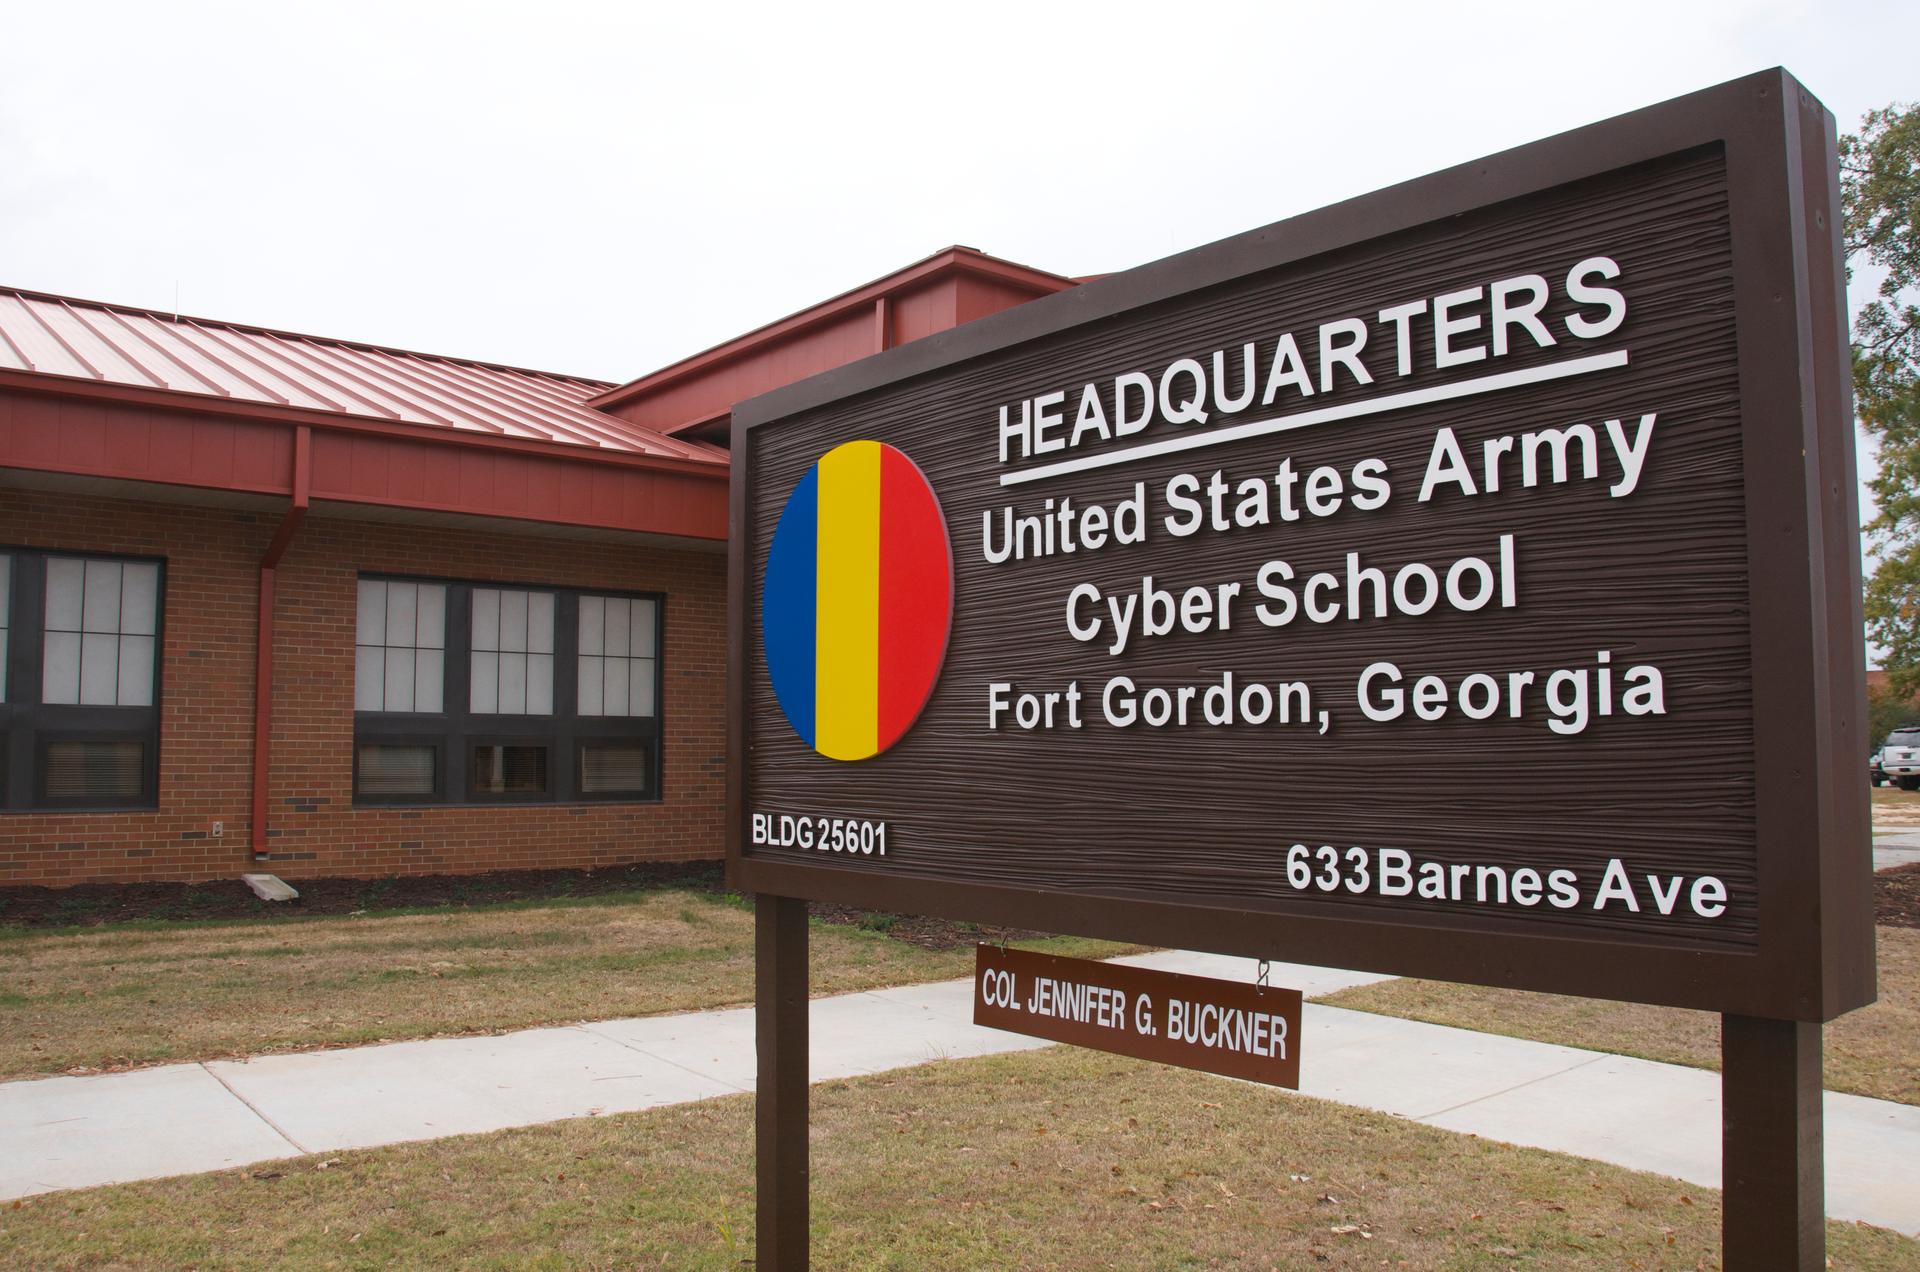 The sign outside the headquarters of the US Army's new Cyber School at Fort Gordon, Georgia. The school is part of the Army's creation of a new cyberwarfare branch.